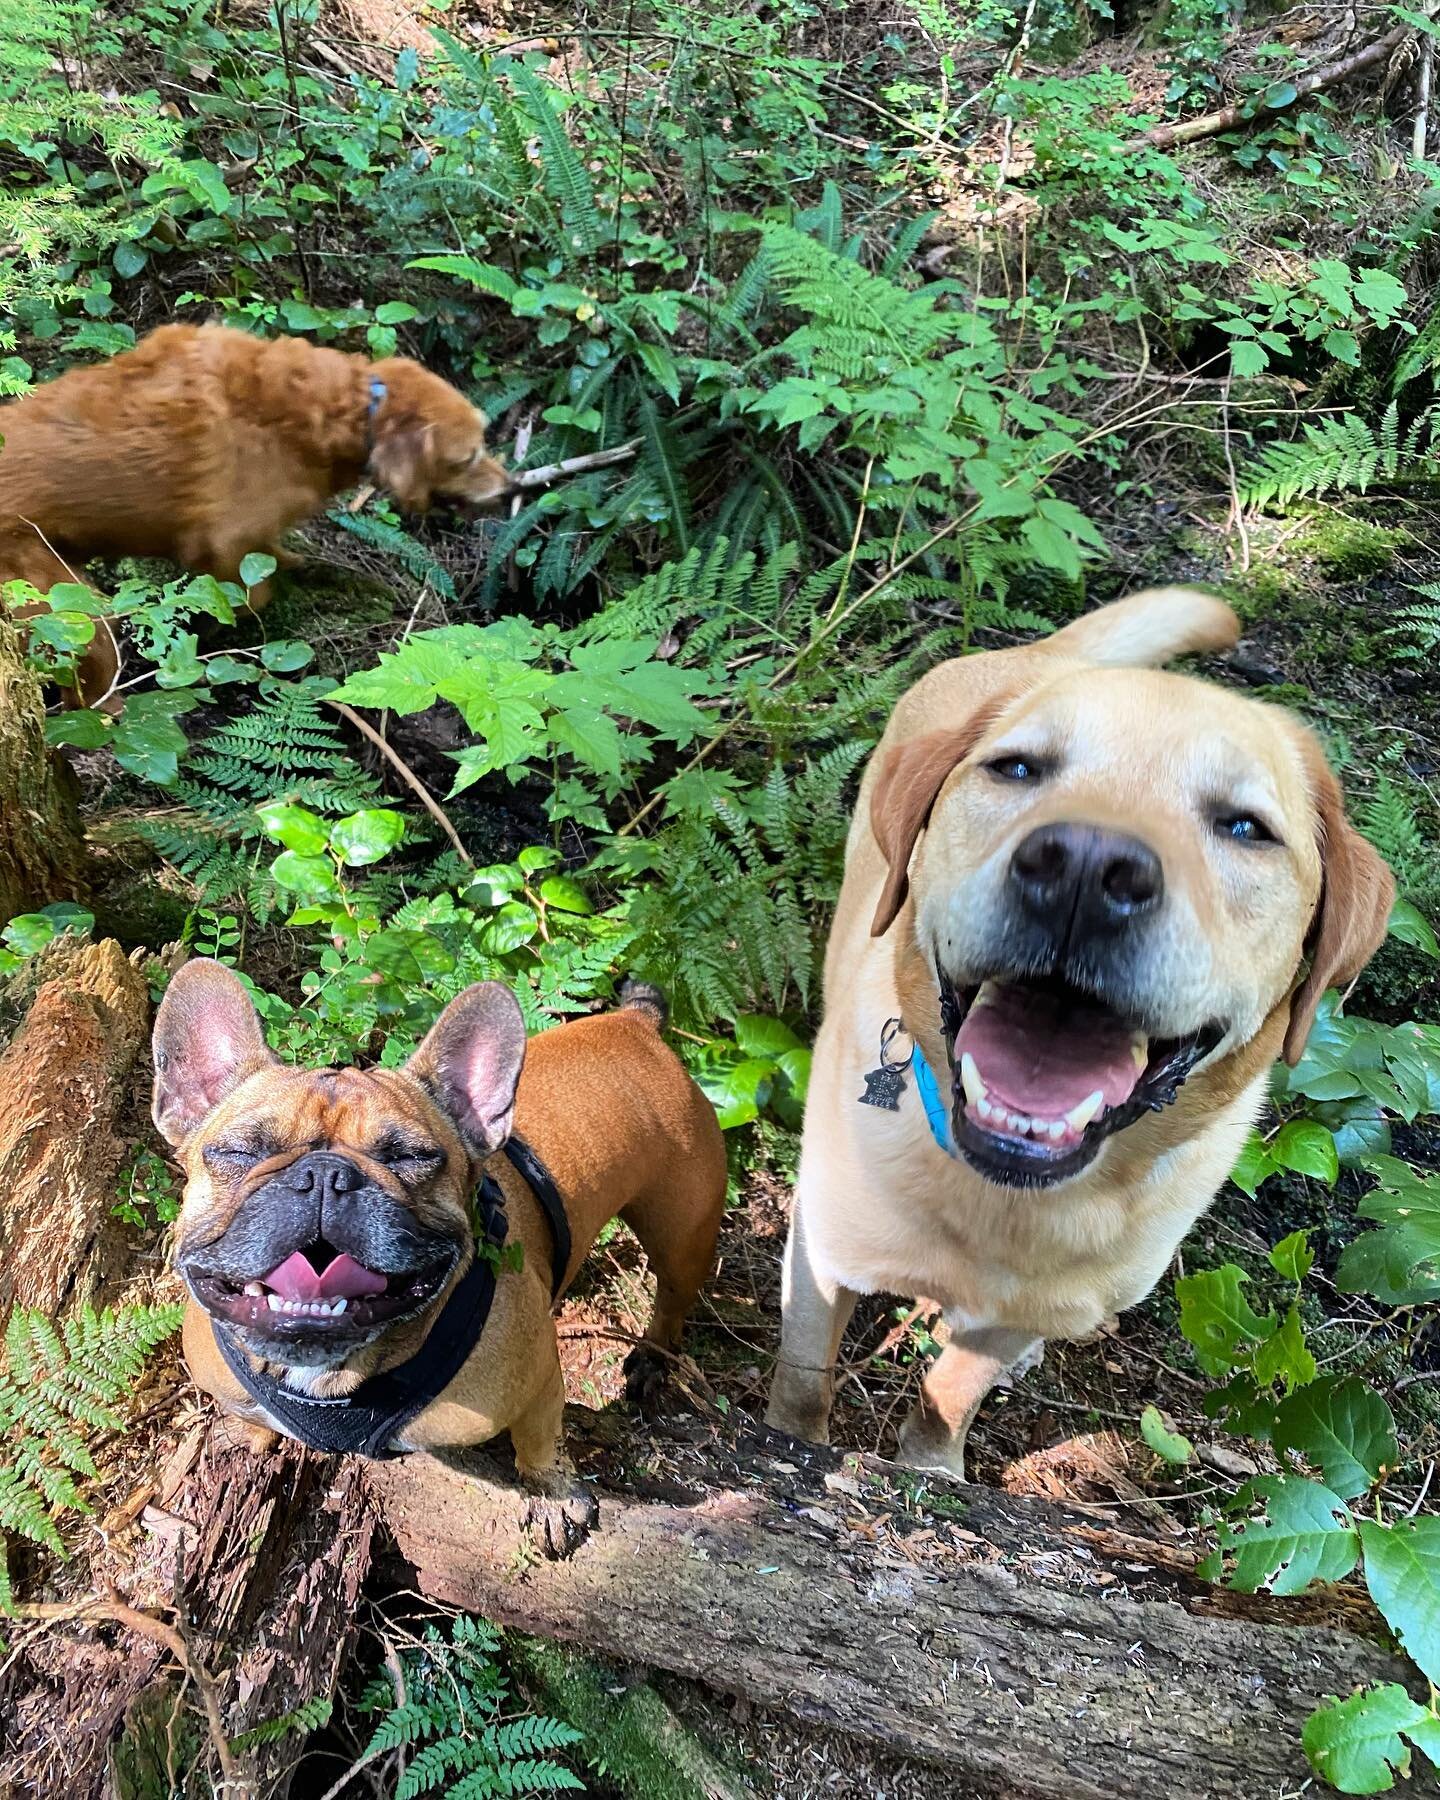 Luna and Teak😄😍! 
Ready for a week of fun adventure hikes with my friends! 🐾🏔